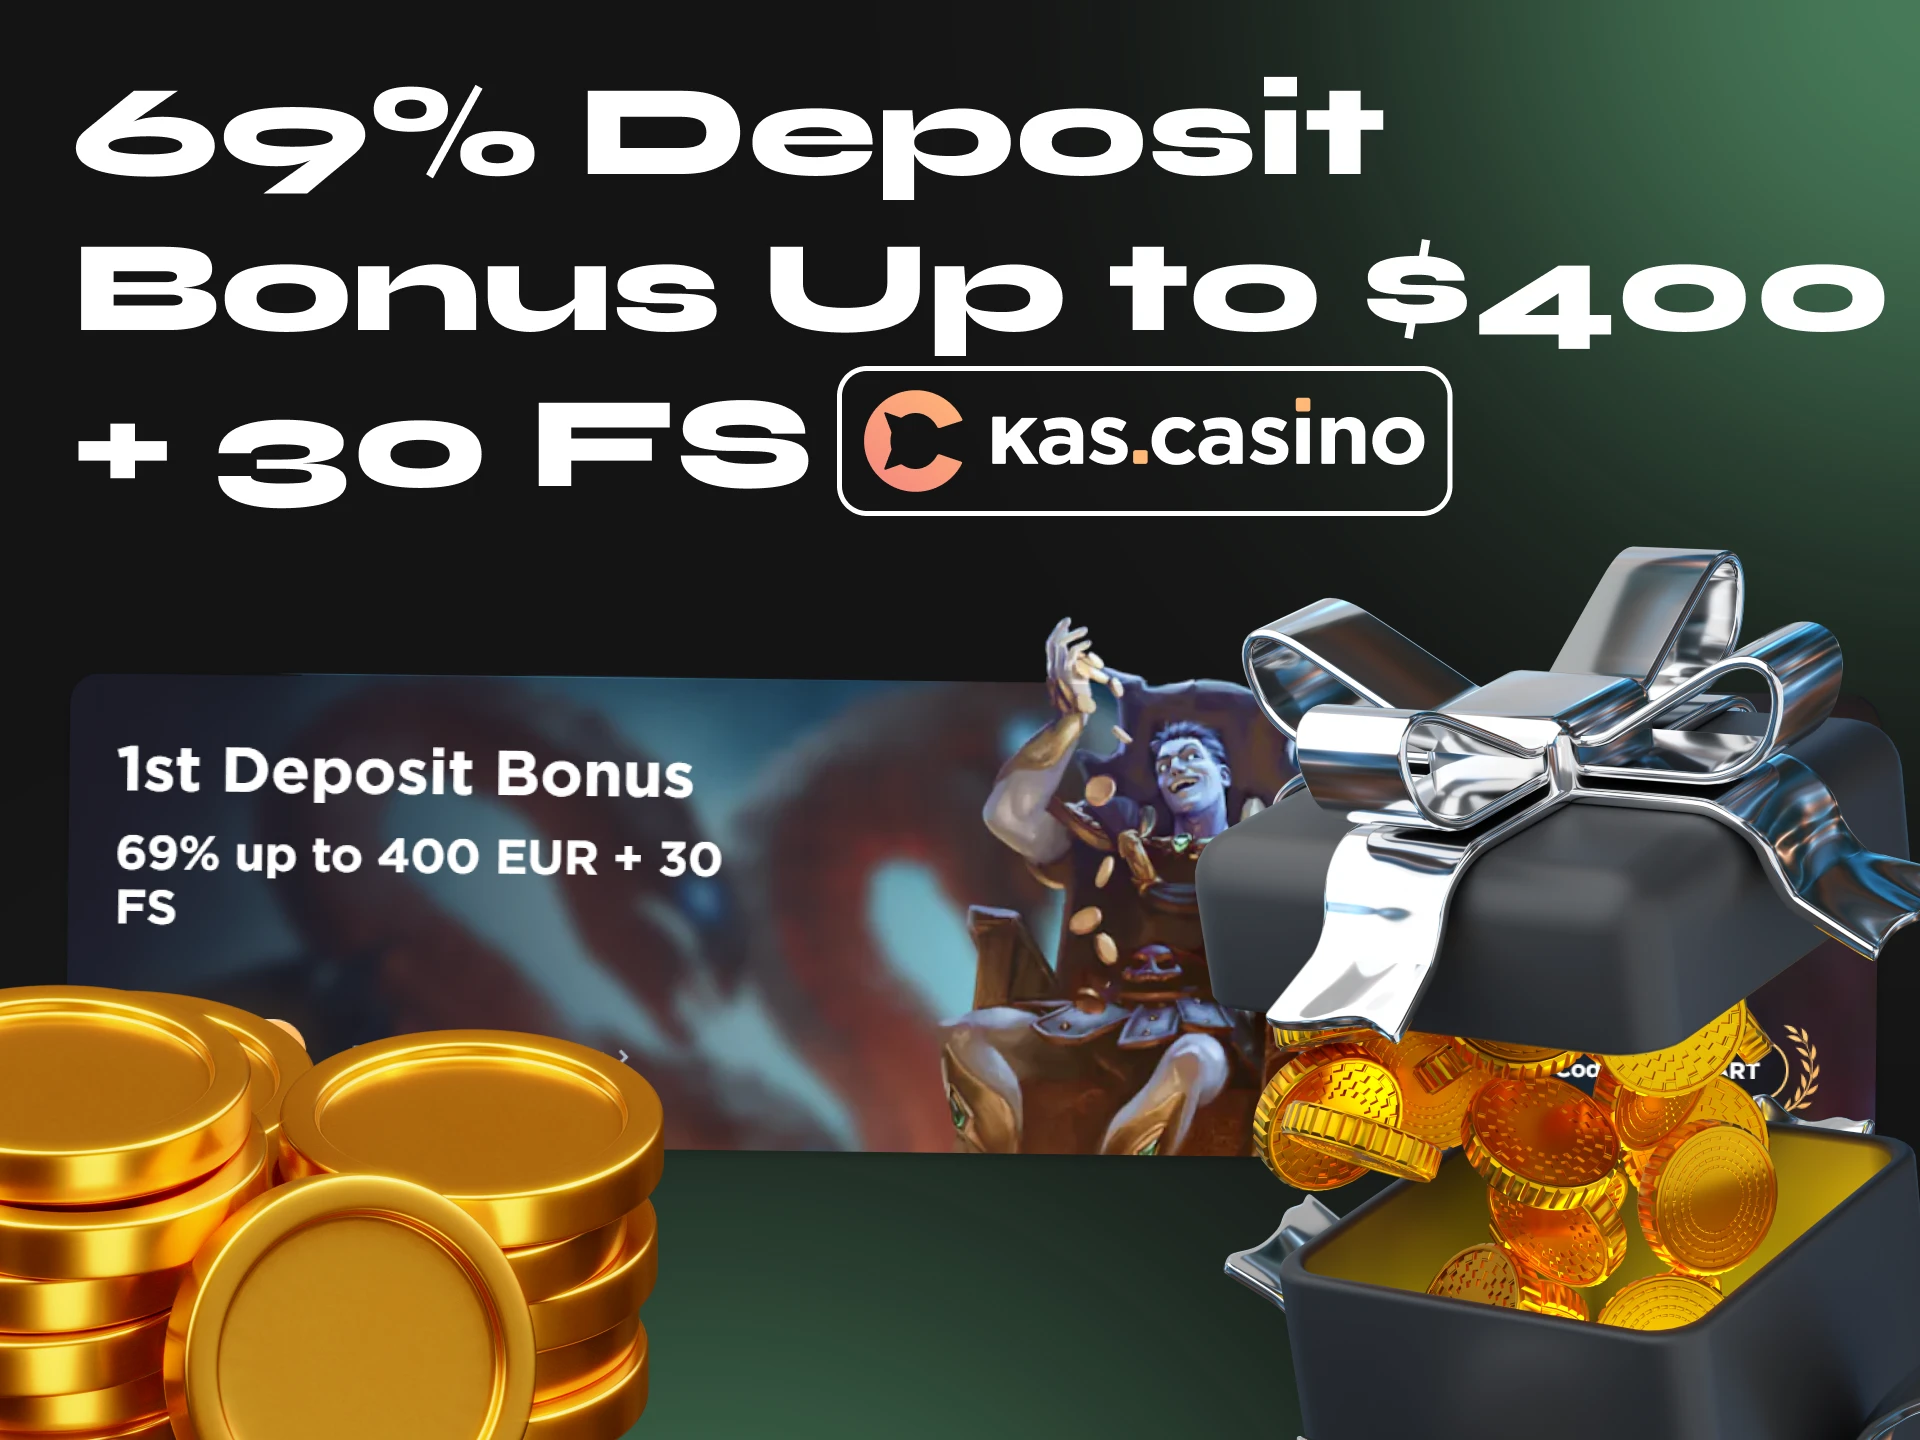 If you are looking for a casino where you can get a welcome bonus and use it in poker games, choose Kas Casino.